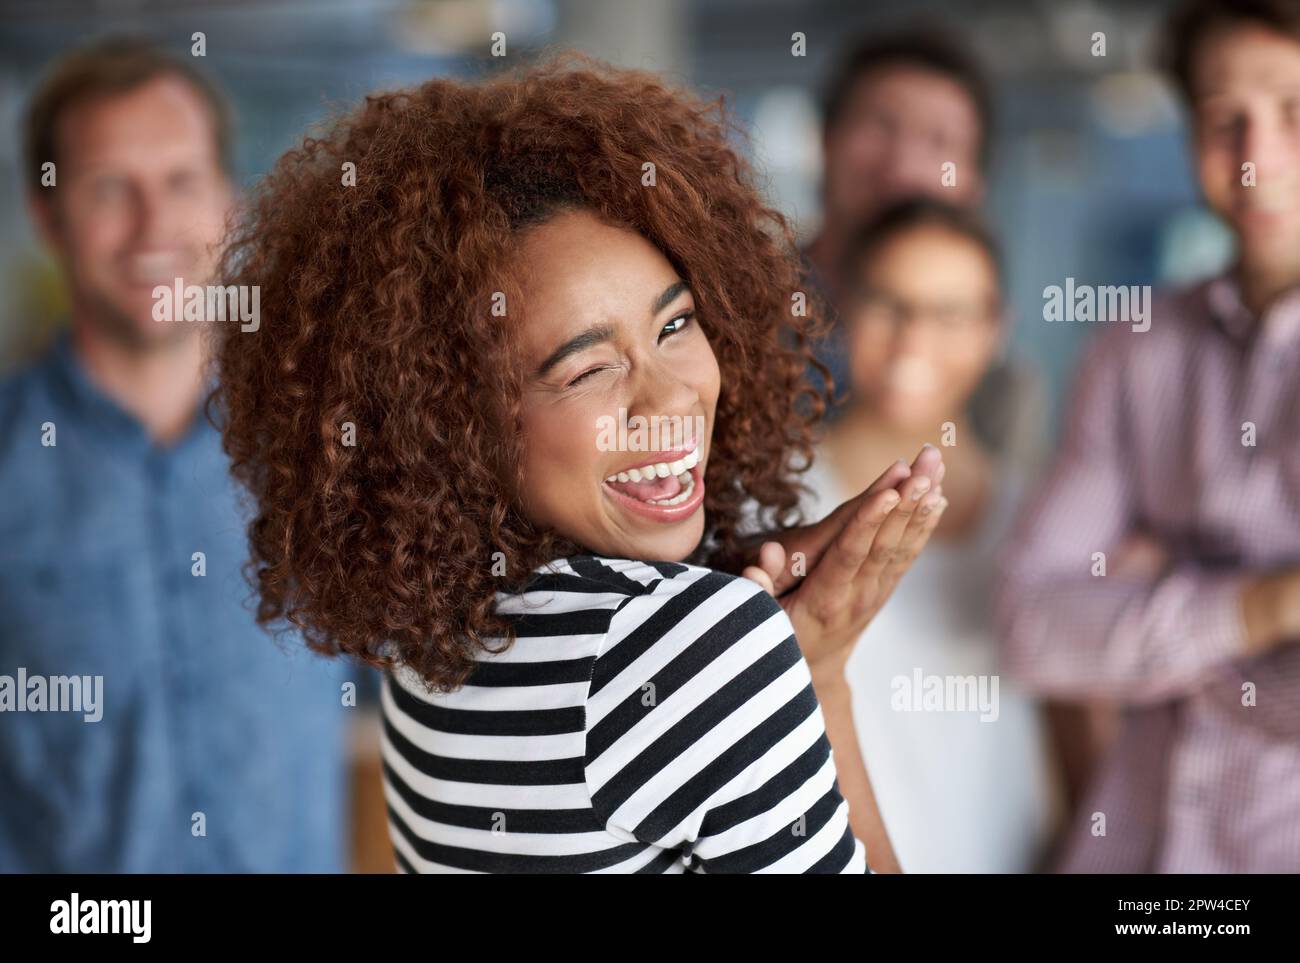 Shes the life of the office. Young woman smiling cheekily at the camera with colleagues in the background Stock Photo